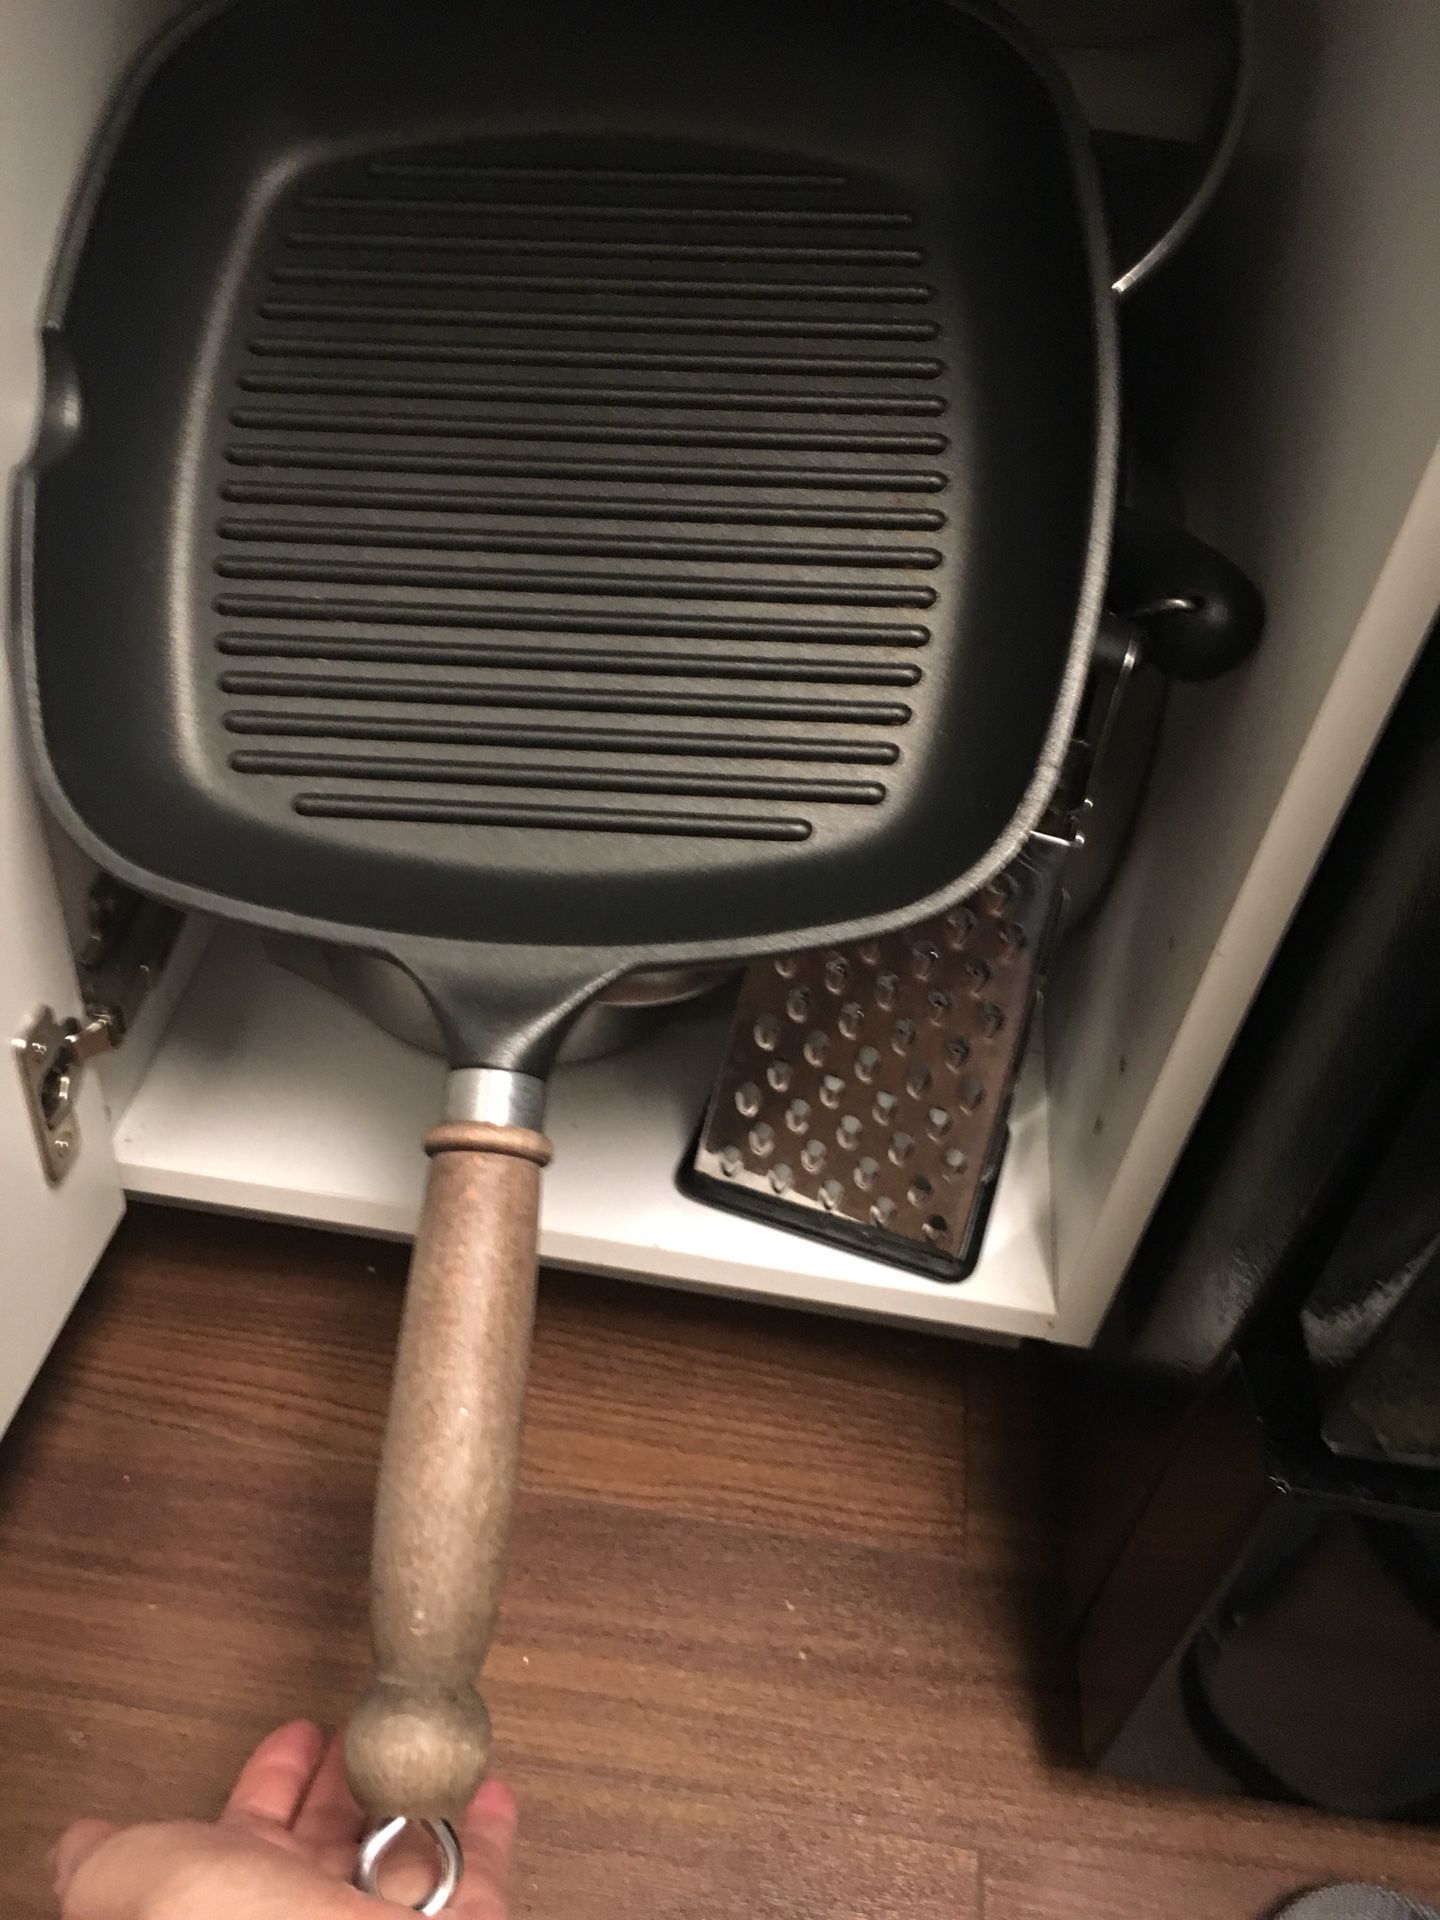 Bake and grill for $40